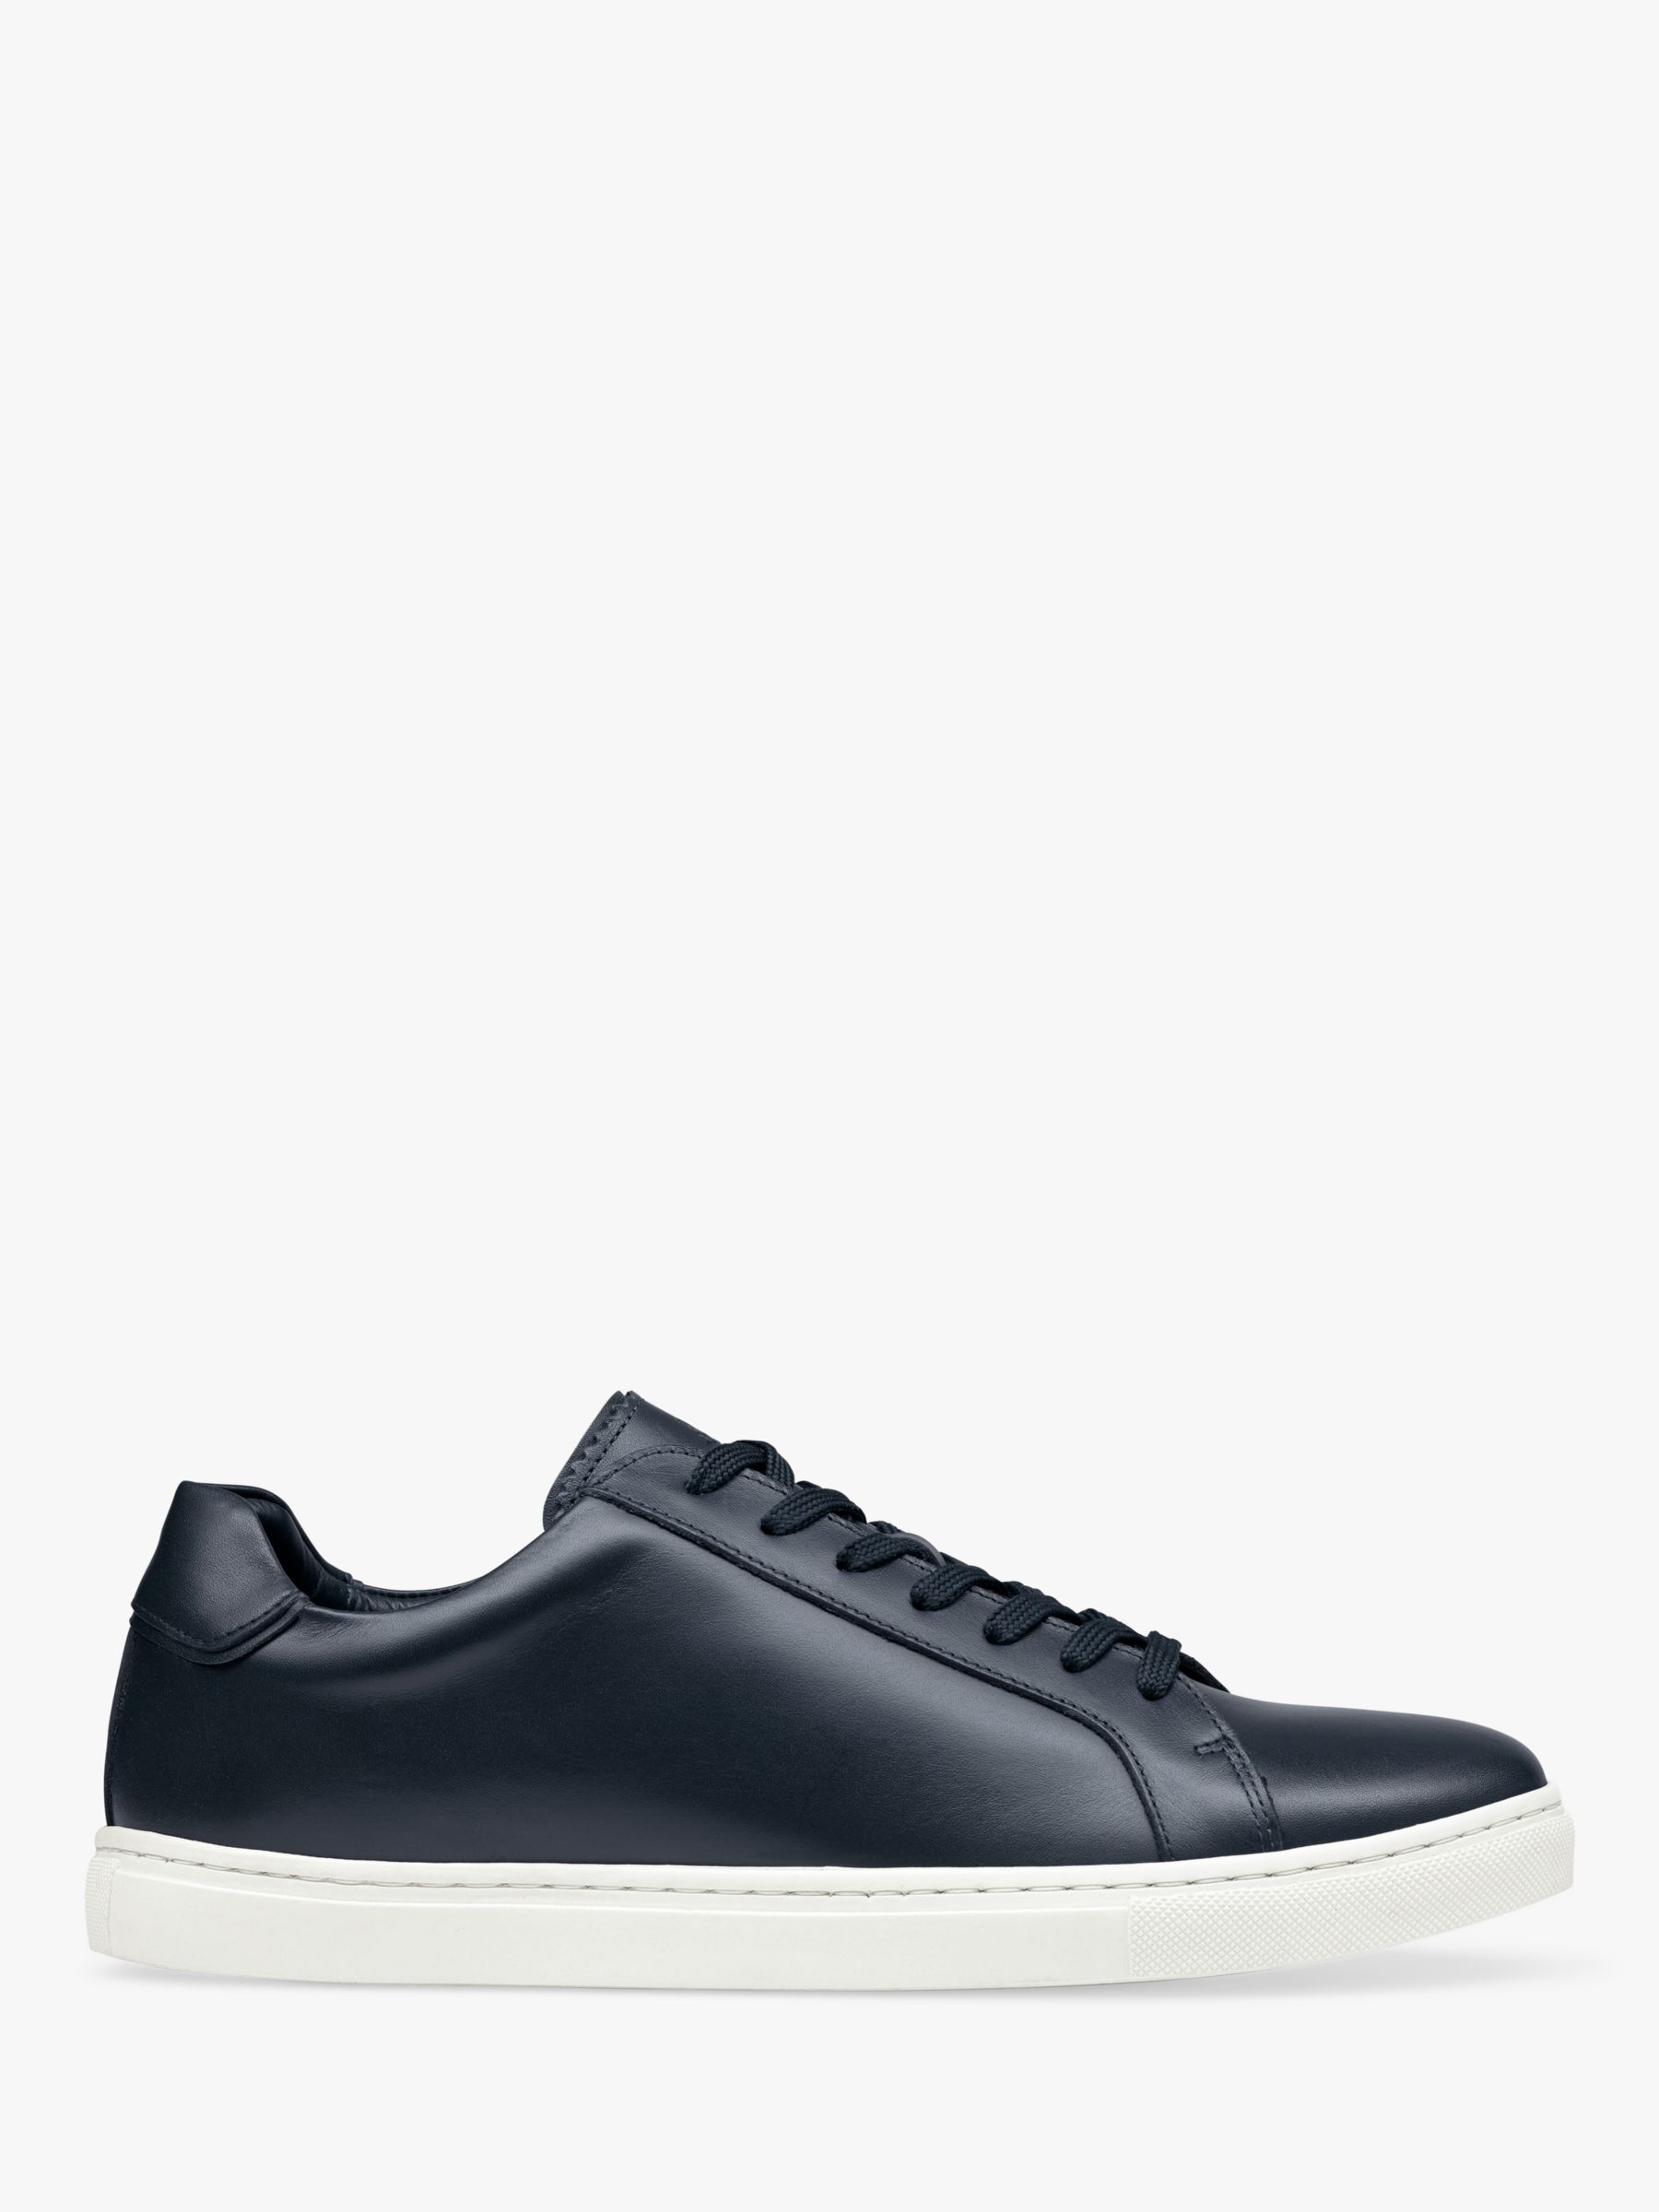 Charles Tyrwhitt Leather Lace Up Trainers, Navy at John Lewis & Partners